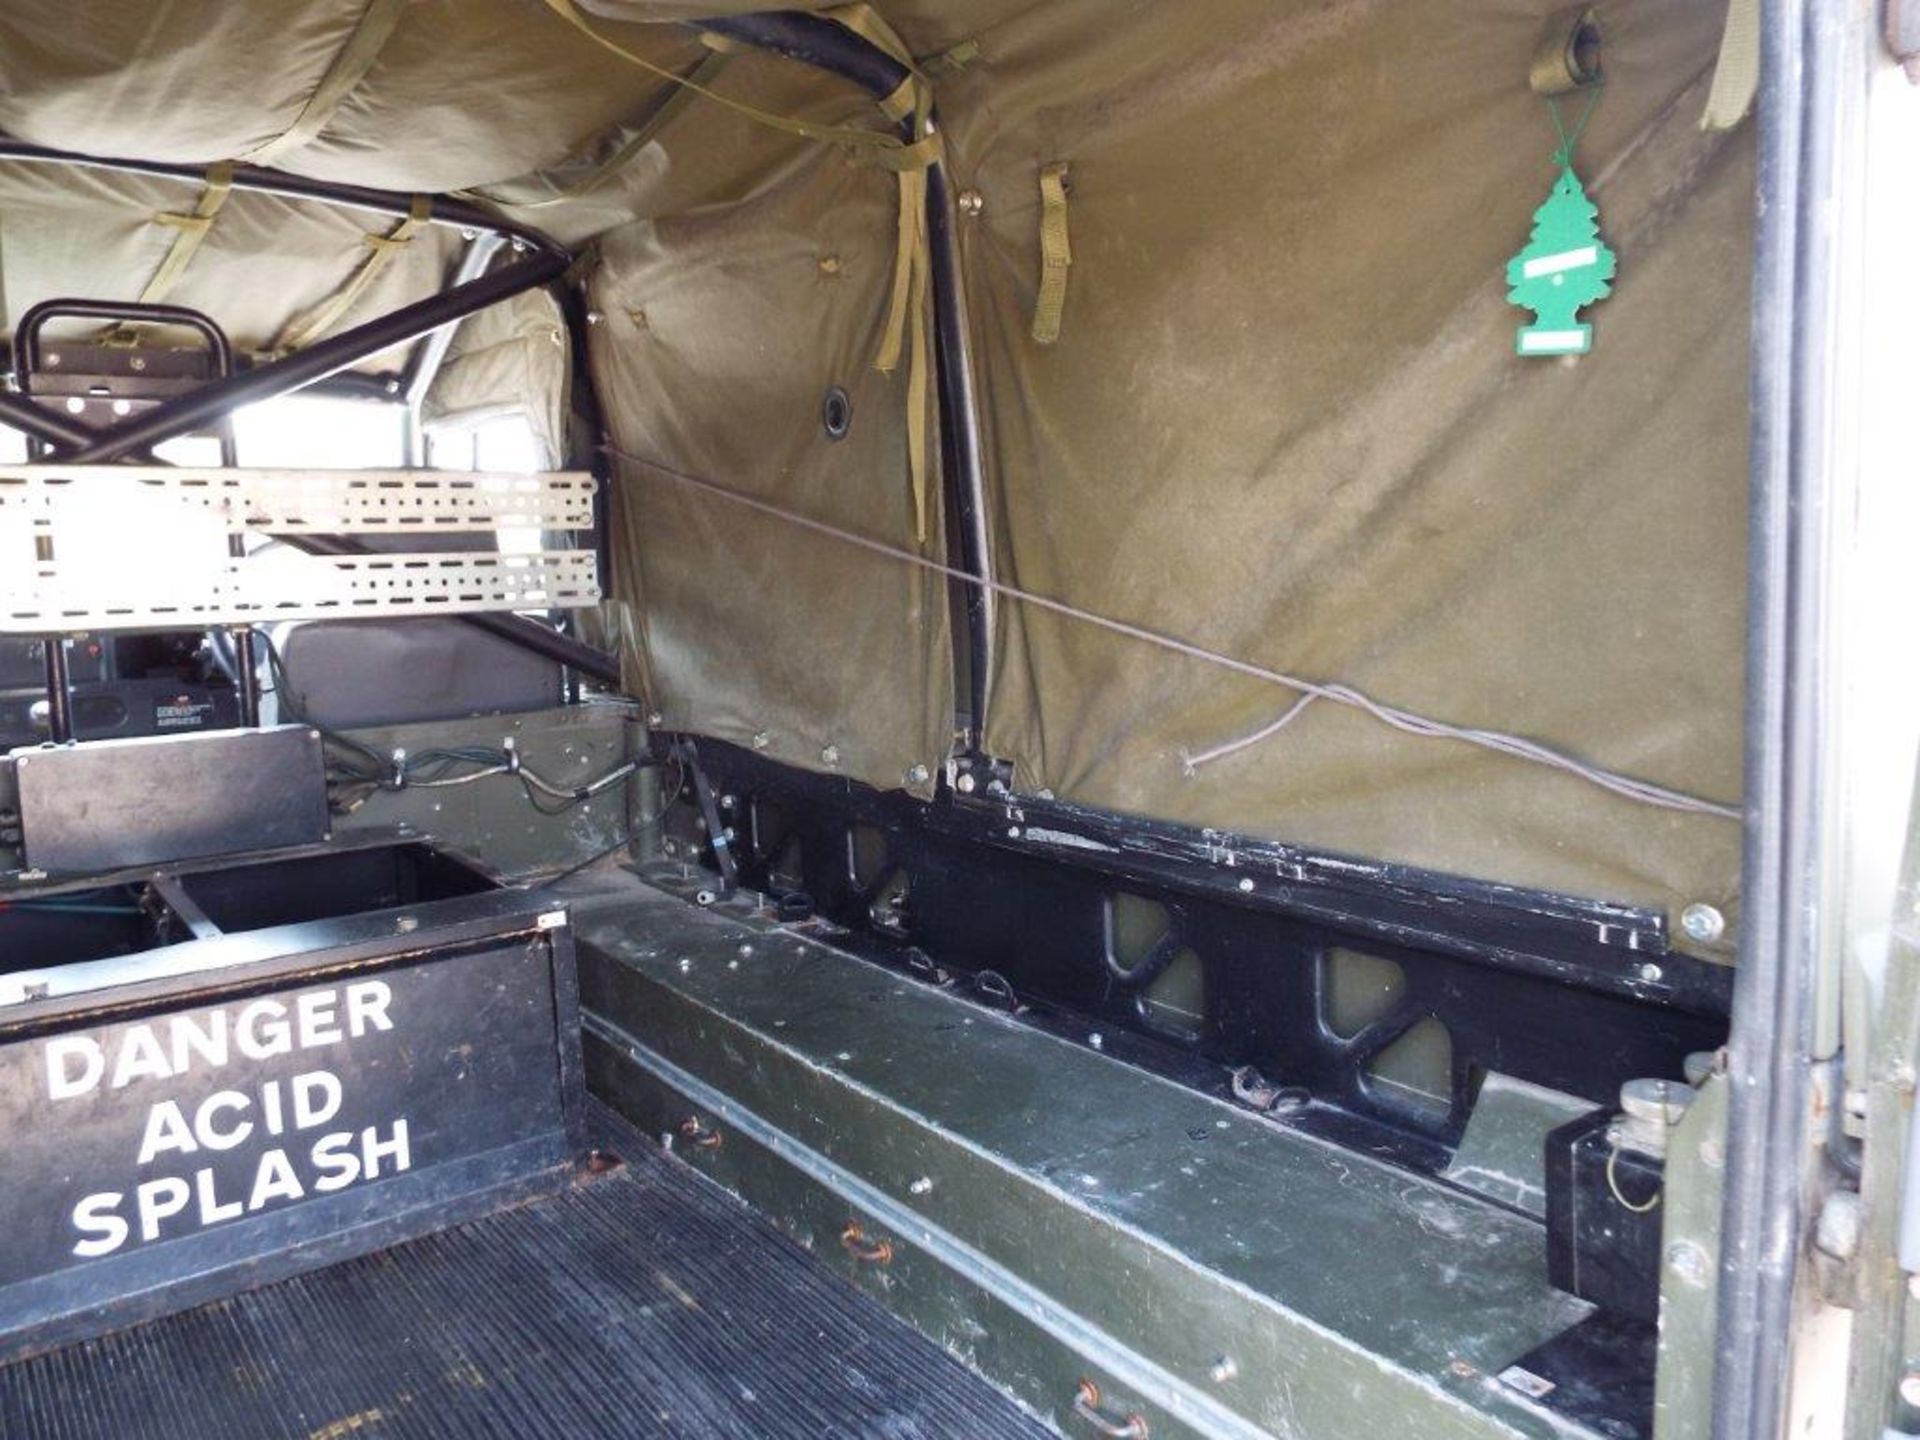 Military Specification Land Rover Wolf 110 Hard Top - Image 16 of 26